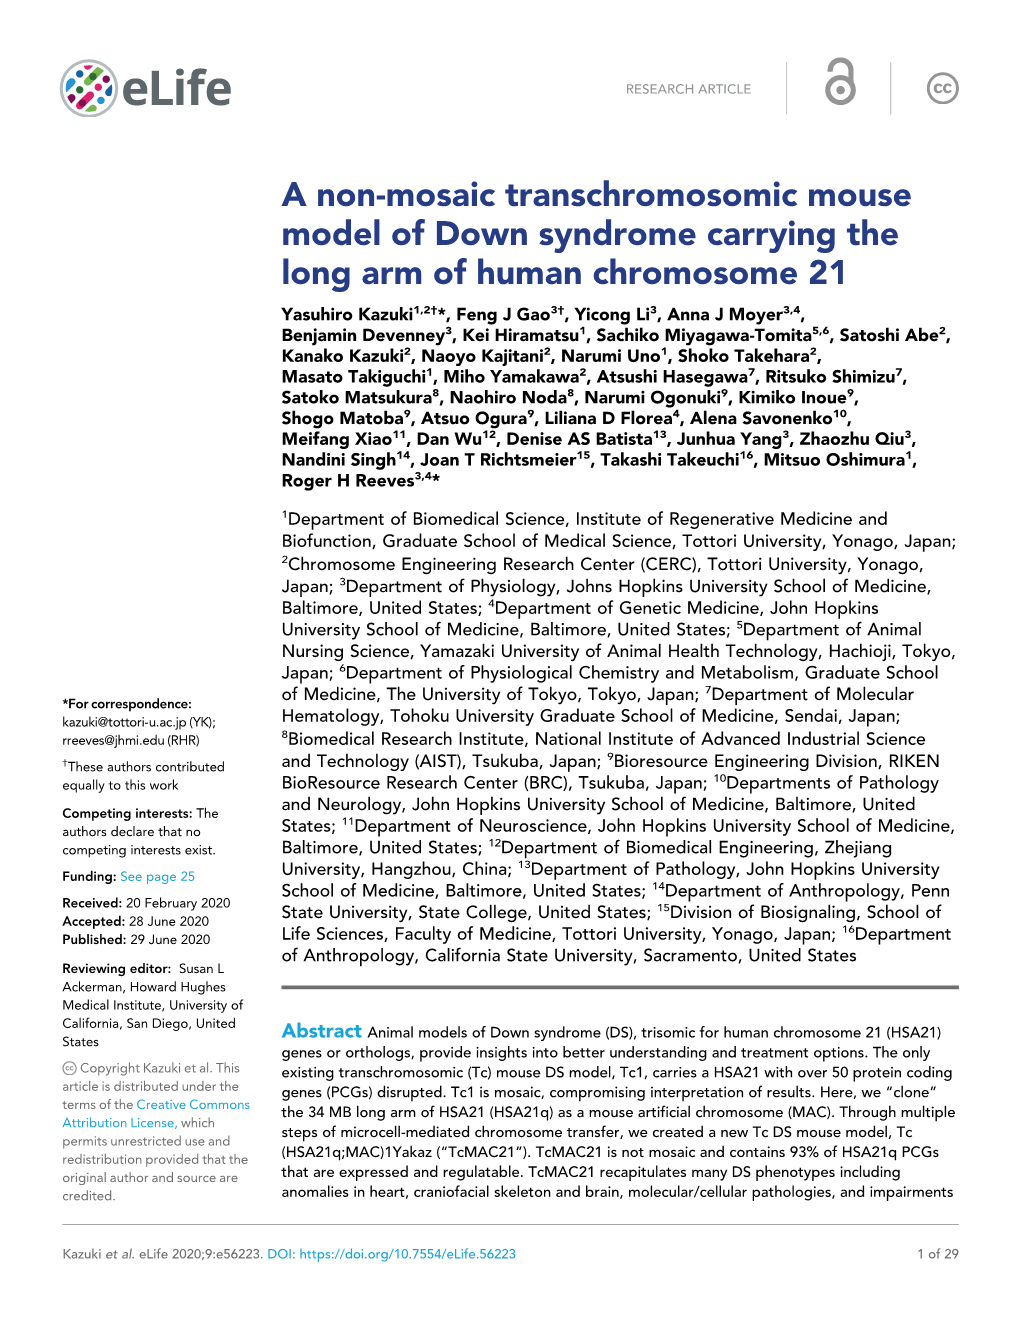 A Non-Mosaic Transchromosomic Mouse Model of Down Syndrome